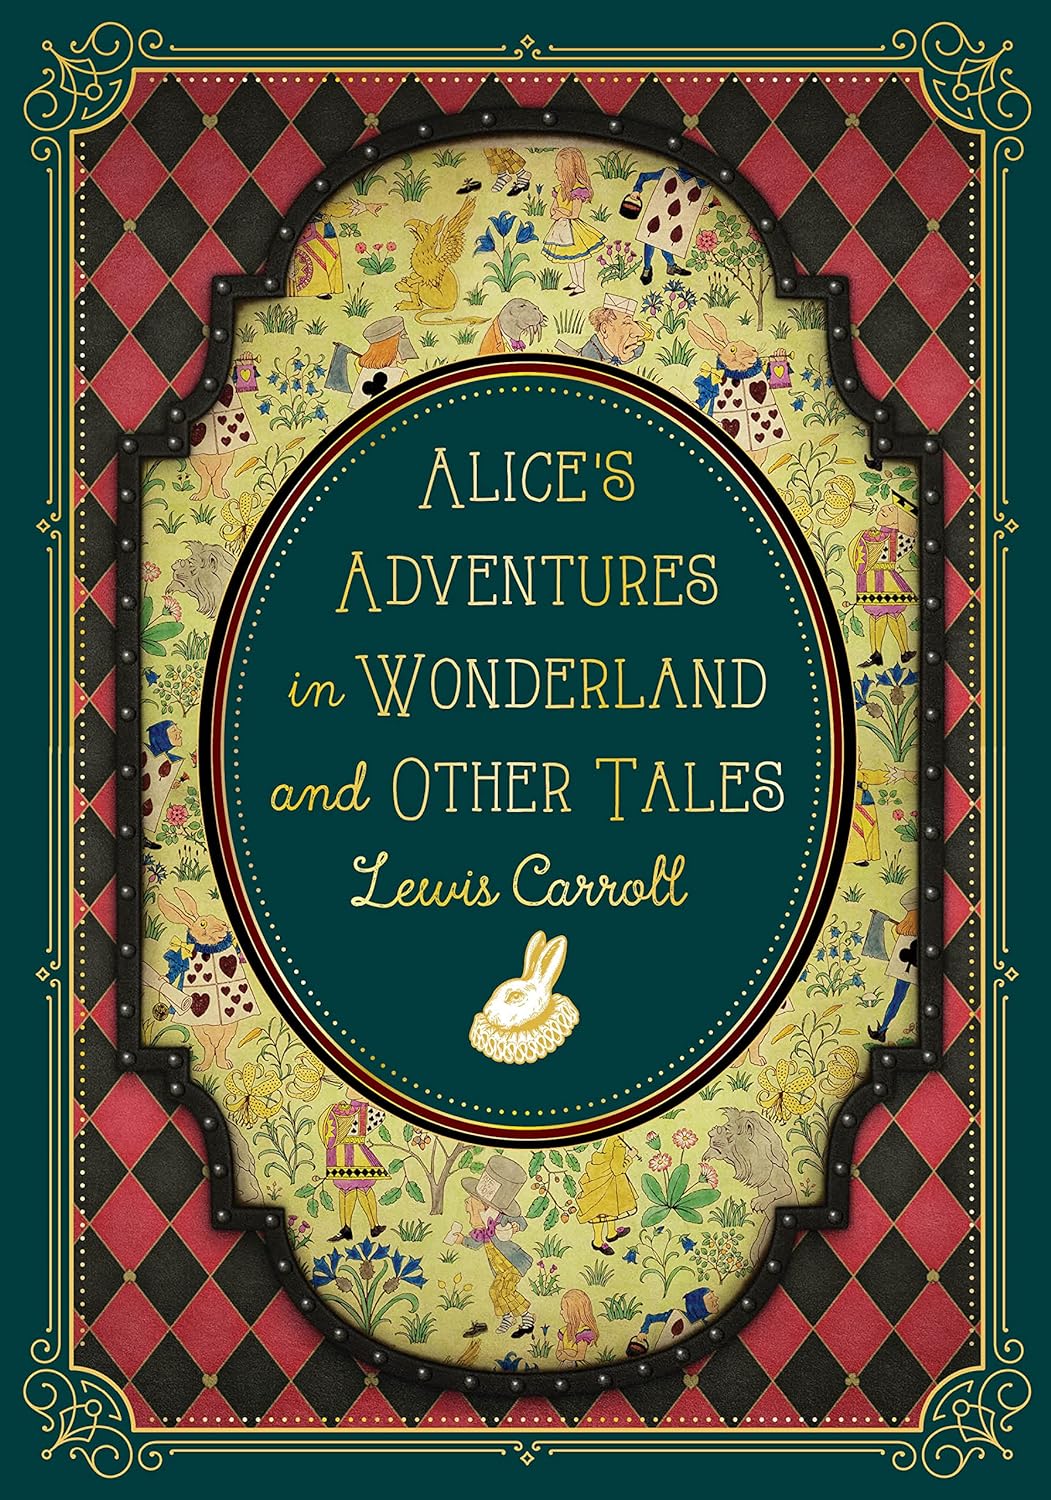 Lewis Carroll: Alice's Adventures in Wonderland and Other Tales, illustrated by John Tenniel